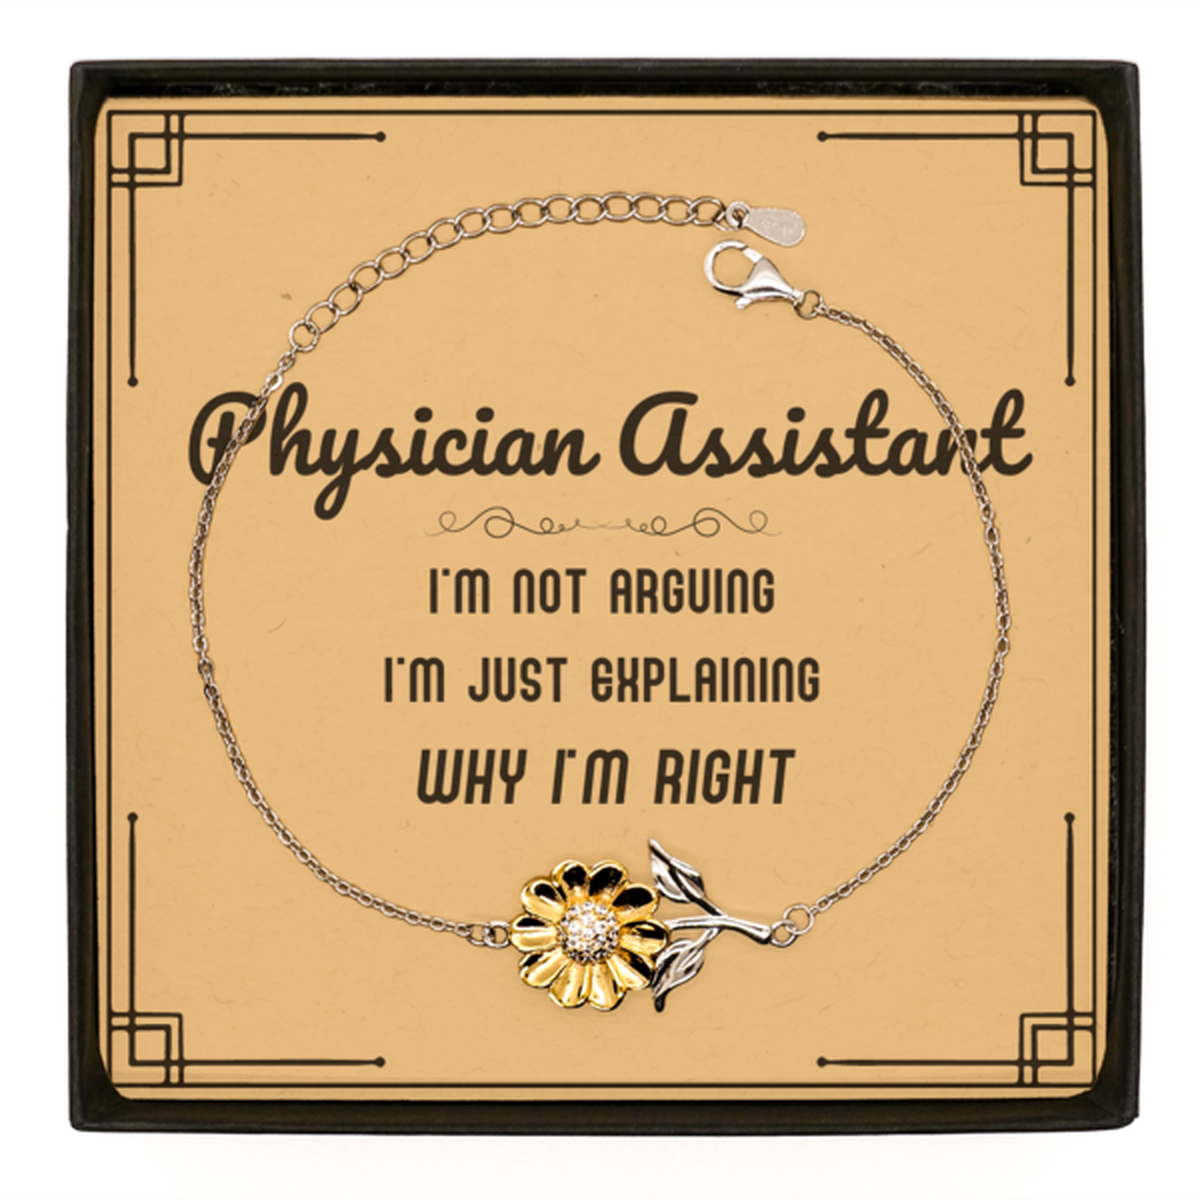 Physician Assistant I'm not Arguing. I'm Just Explaining Why I'm RIGHT Sunflower Bracelet, Funny Saying Quote Physician Assistant Gifts For Physician Assistant Message Card Graduation Birthday Christmas Gifts for Men Women Coworker